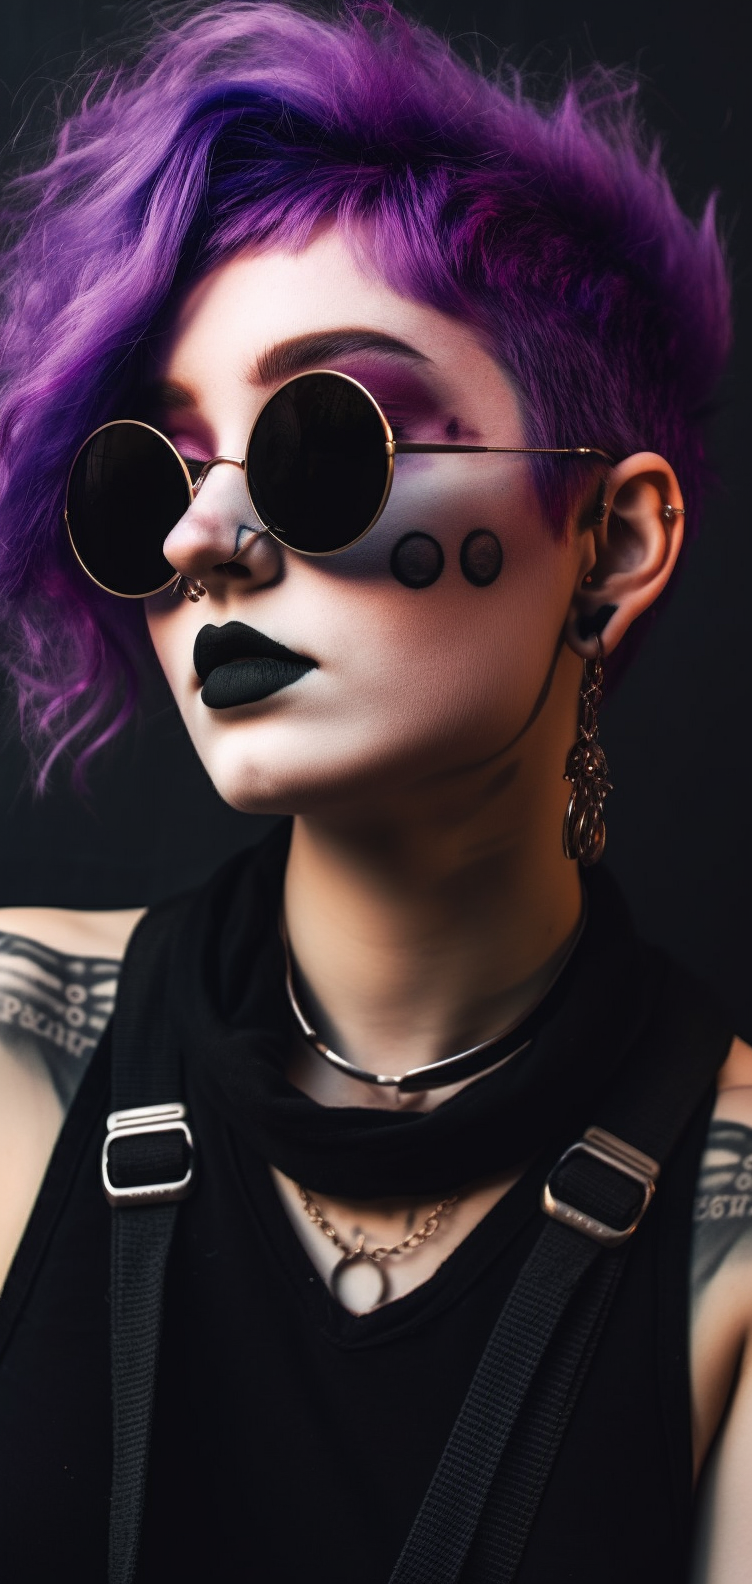 Jen_Palmer_a_woman_with_purple_hair_bracelets_and_sunglasses_in_d84b8dc0-1db9-4a88-81cd-89bfb0031b0c.png